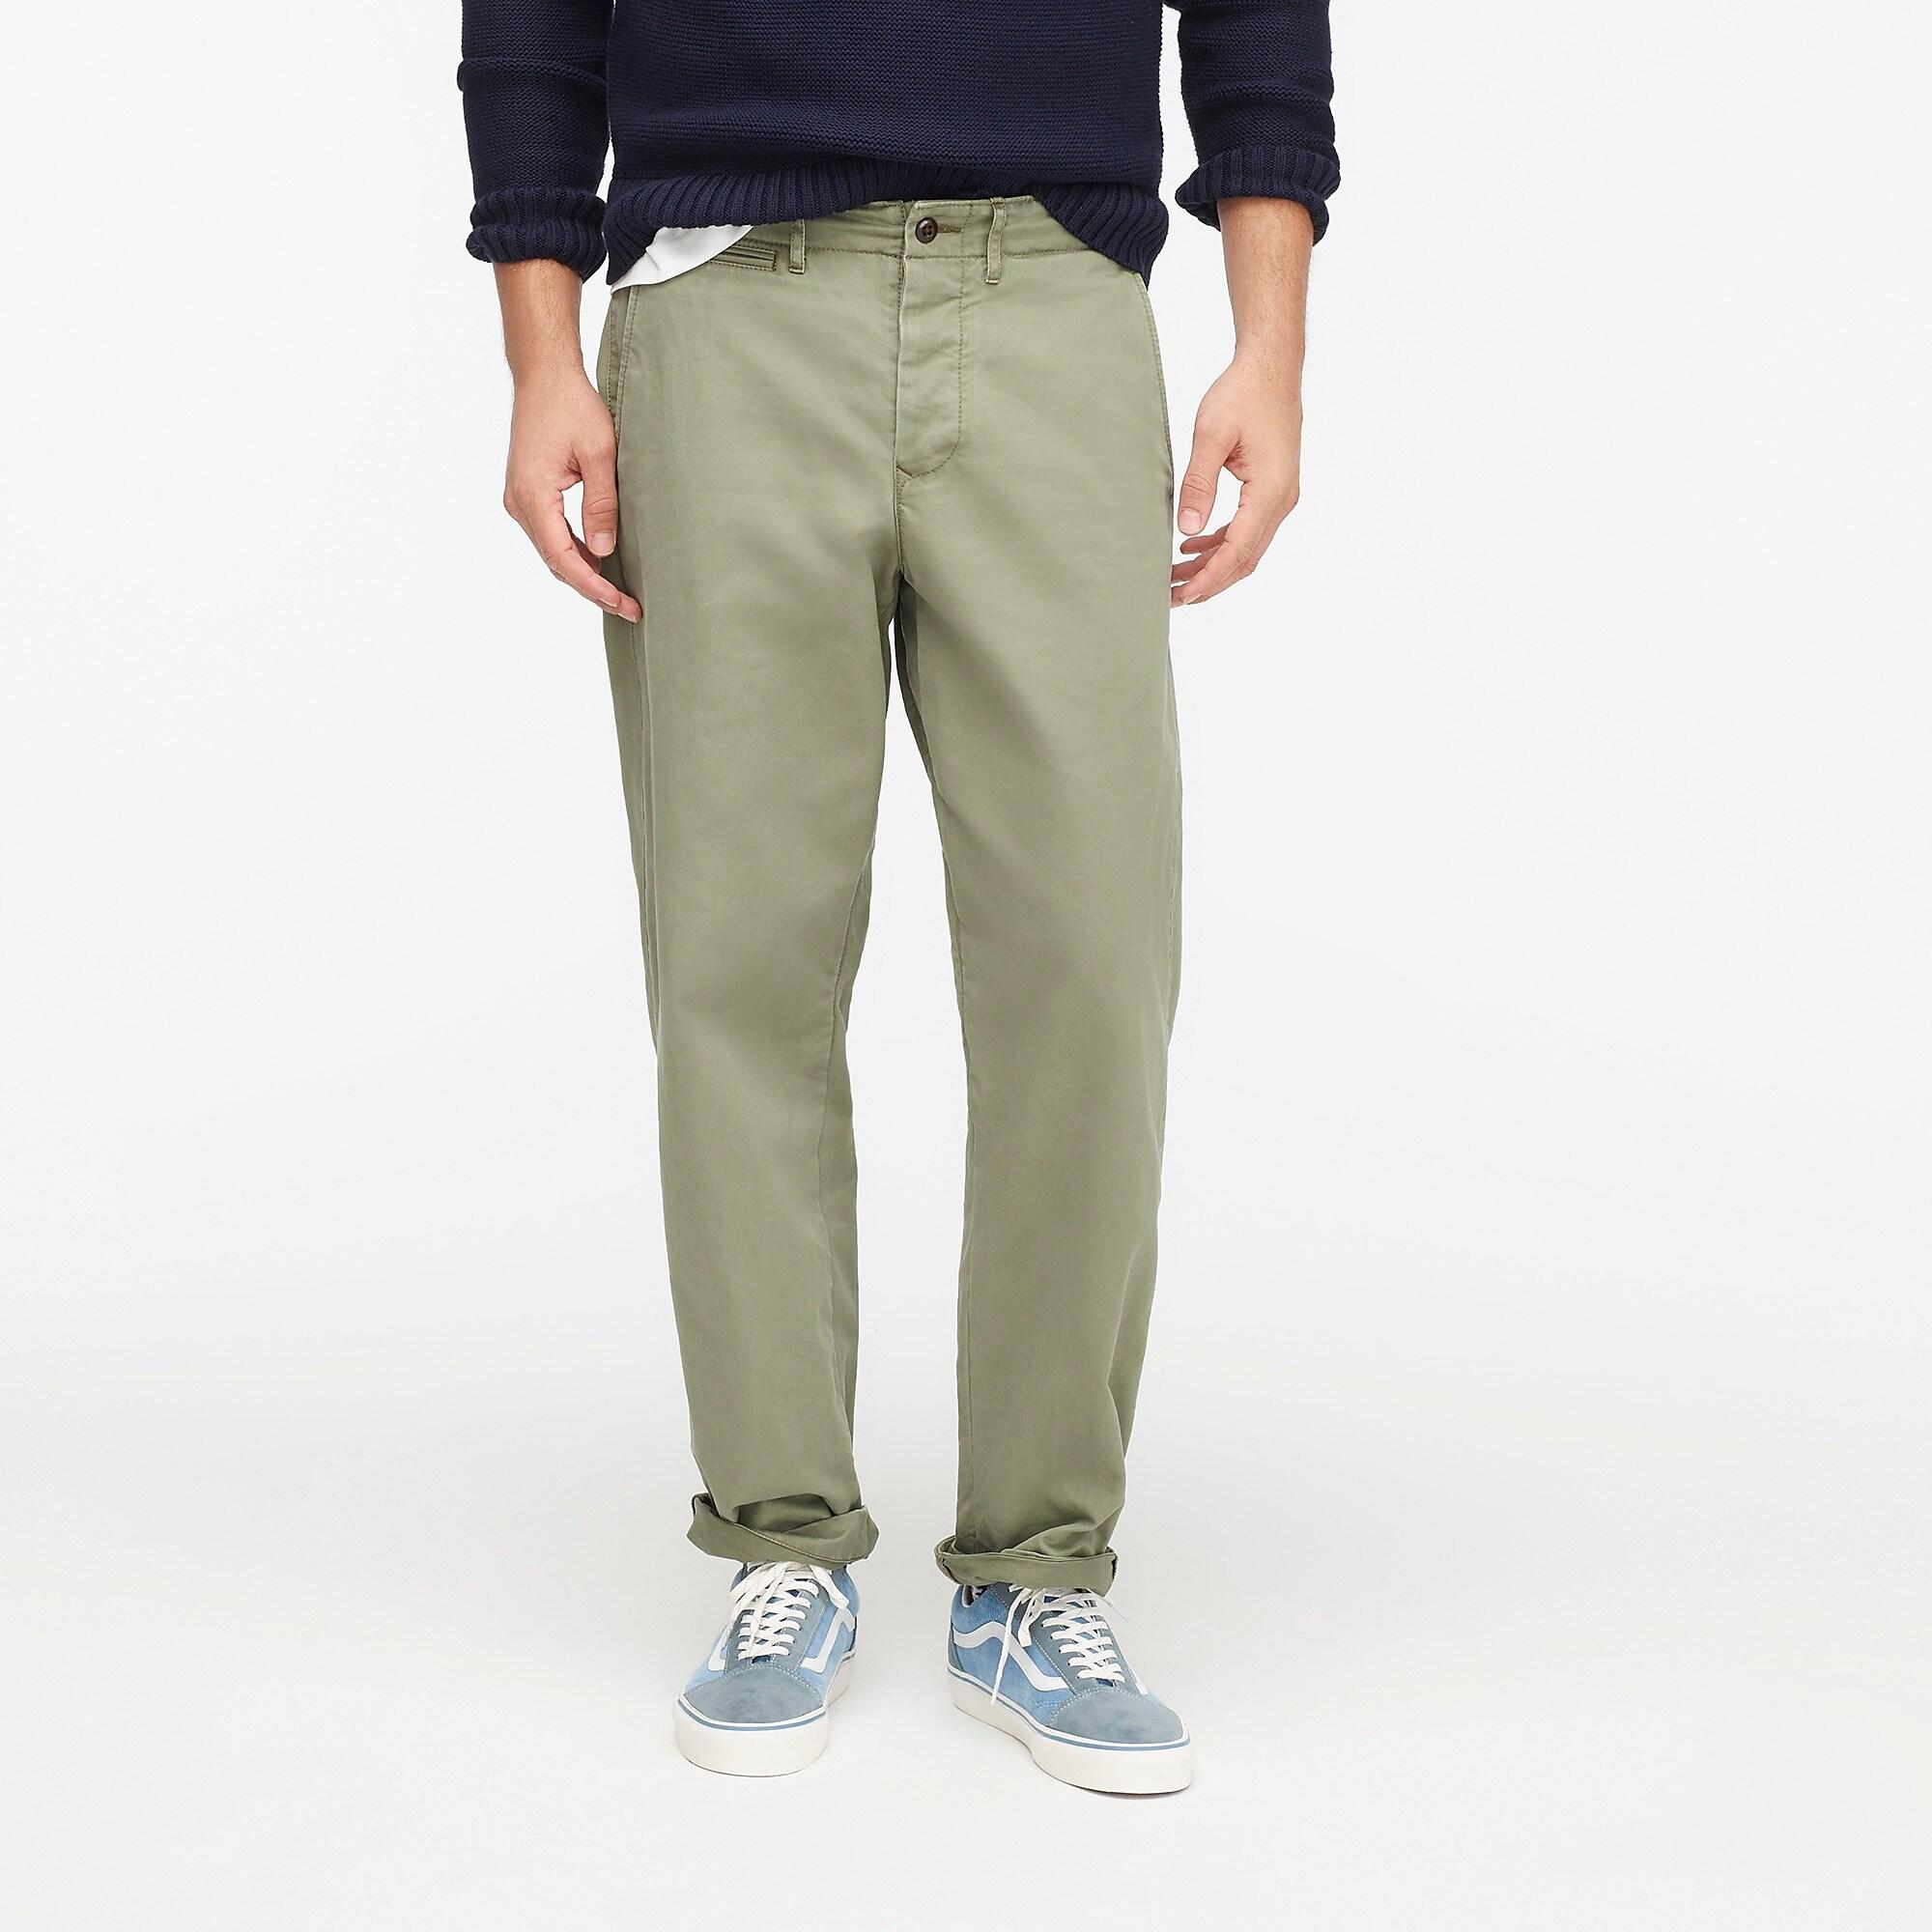 J.Crew Wallace & Barnes Military Officer's Chino In Olive Cotton Twill ...